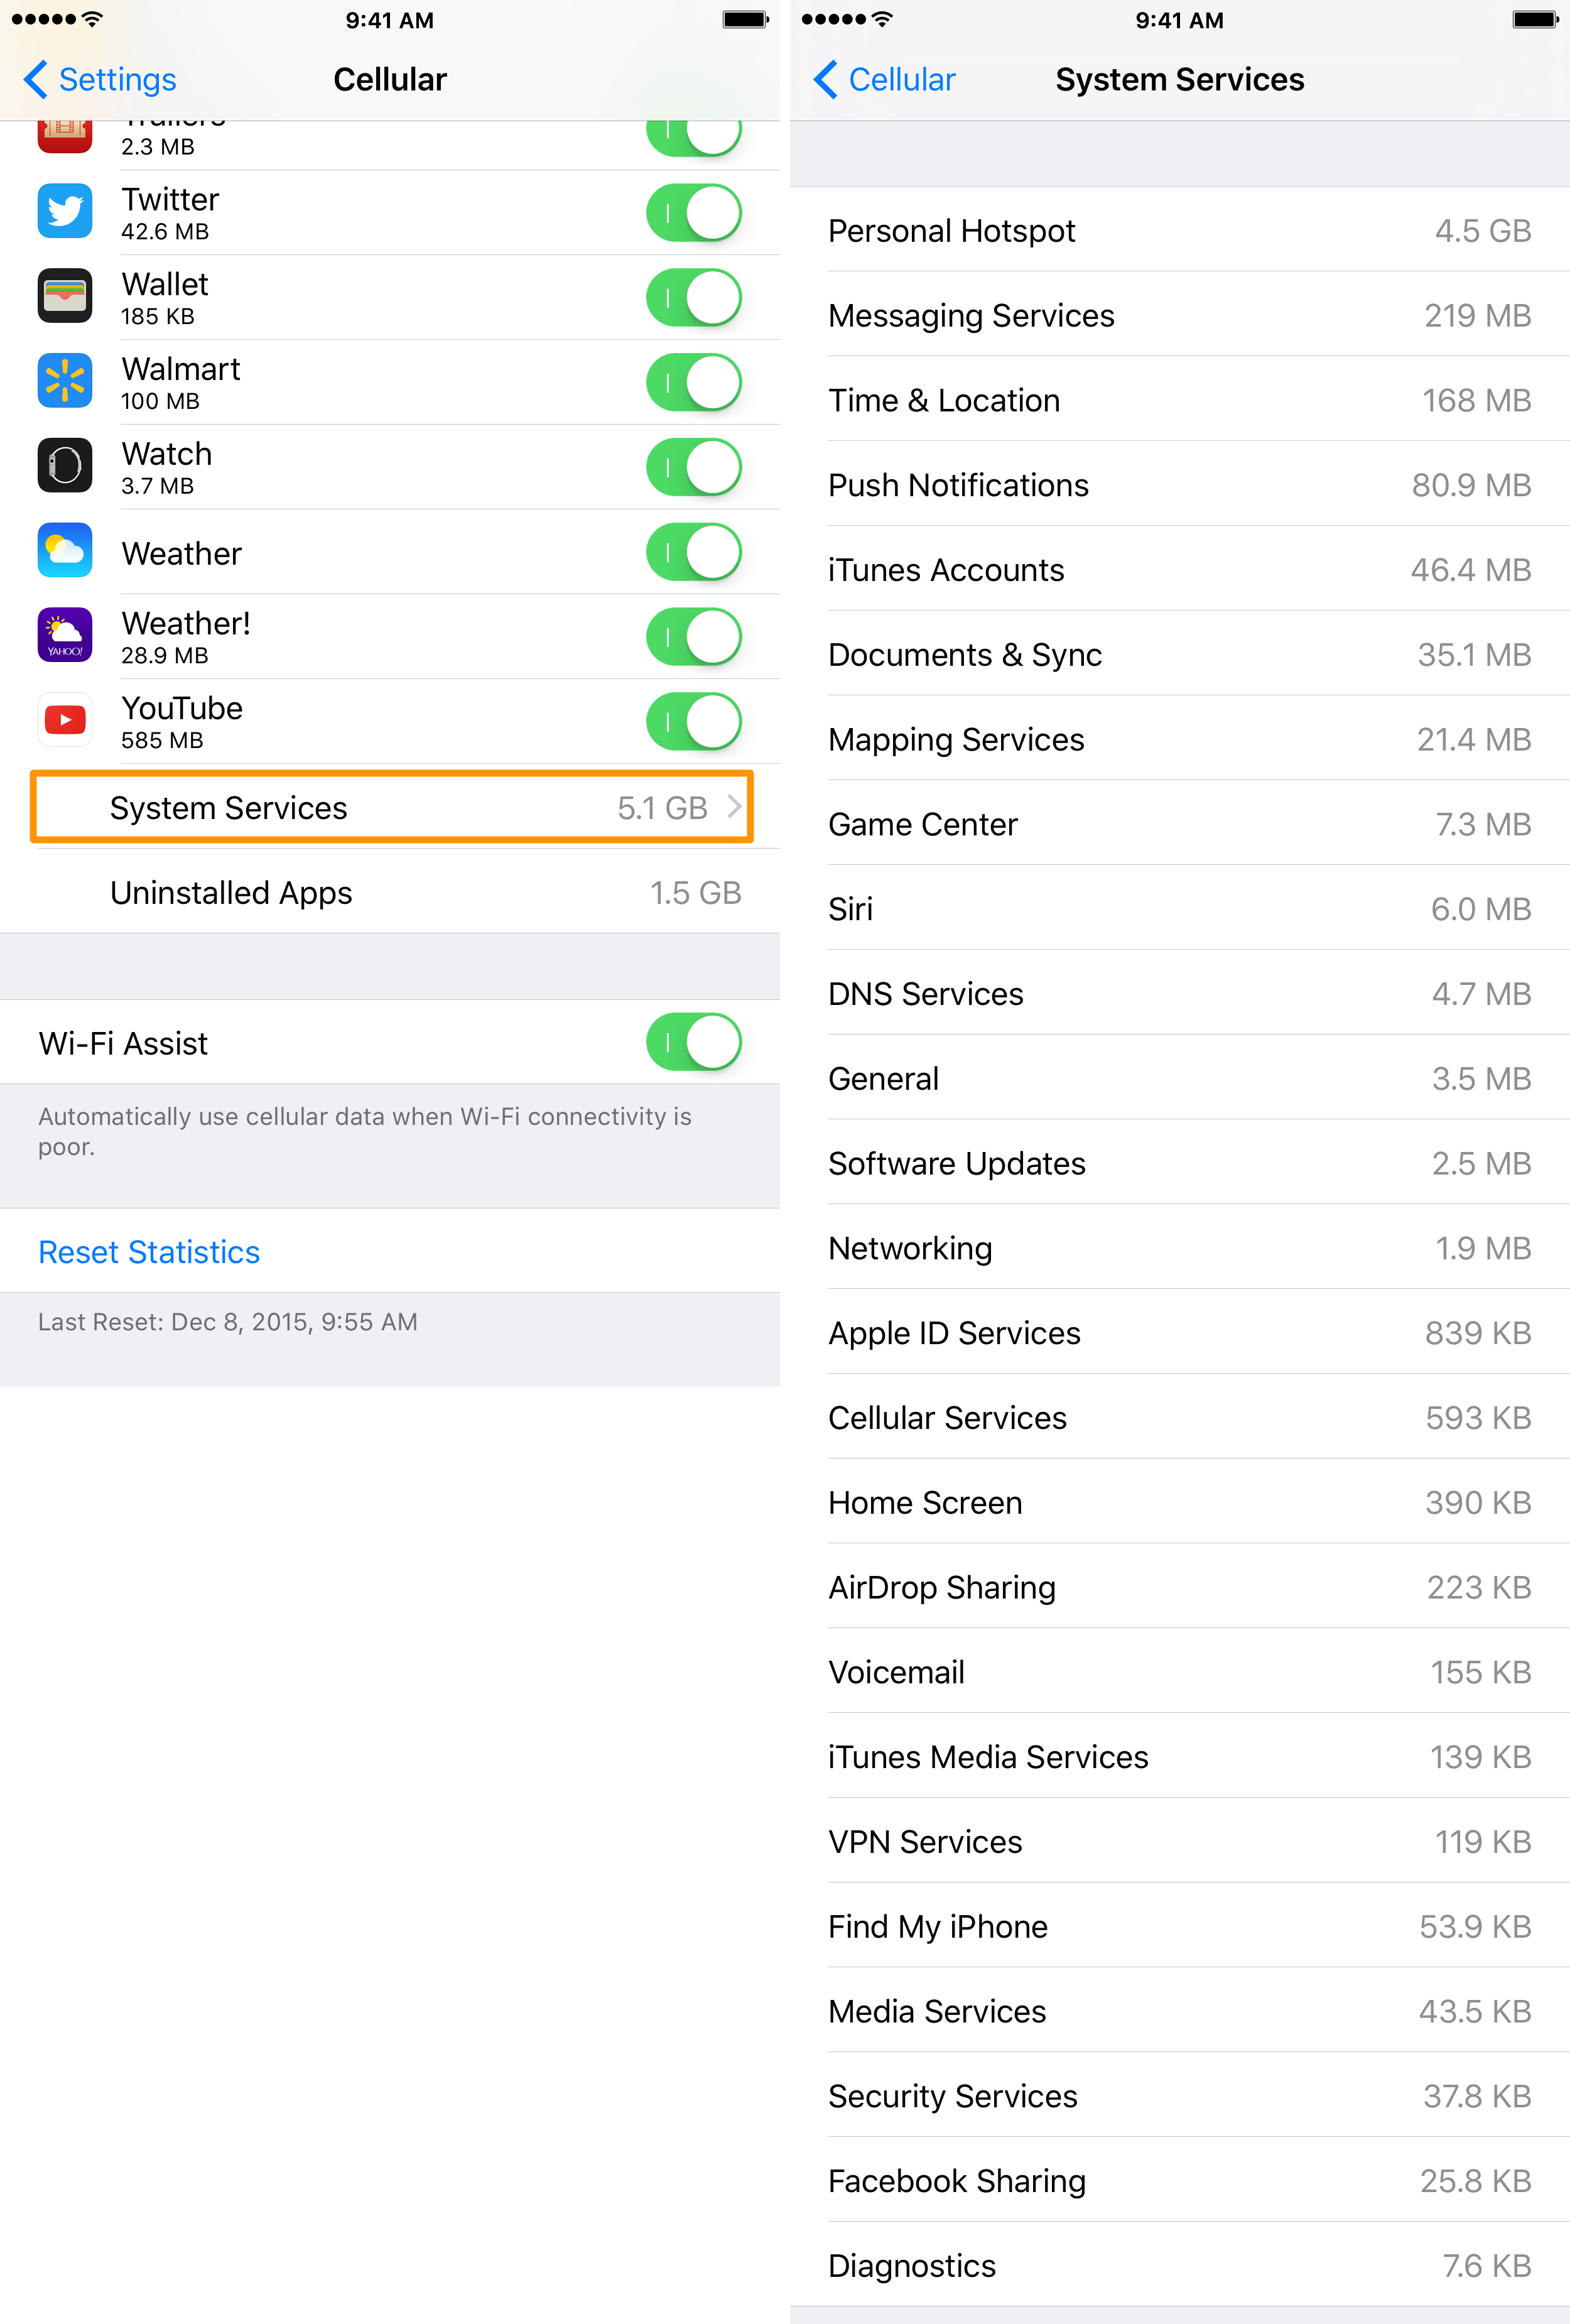 How much data are iOS system services using